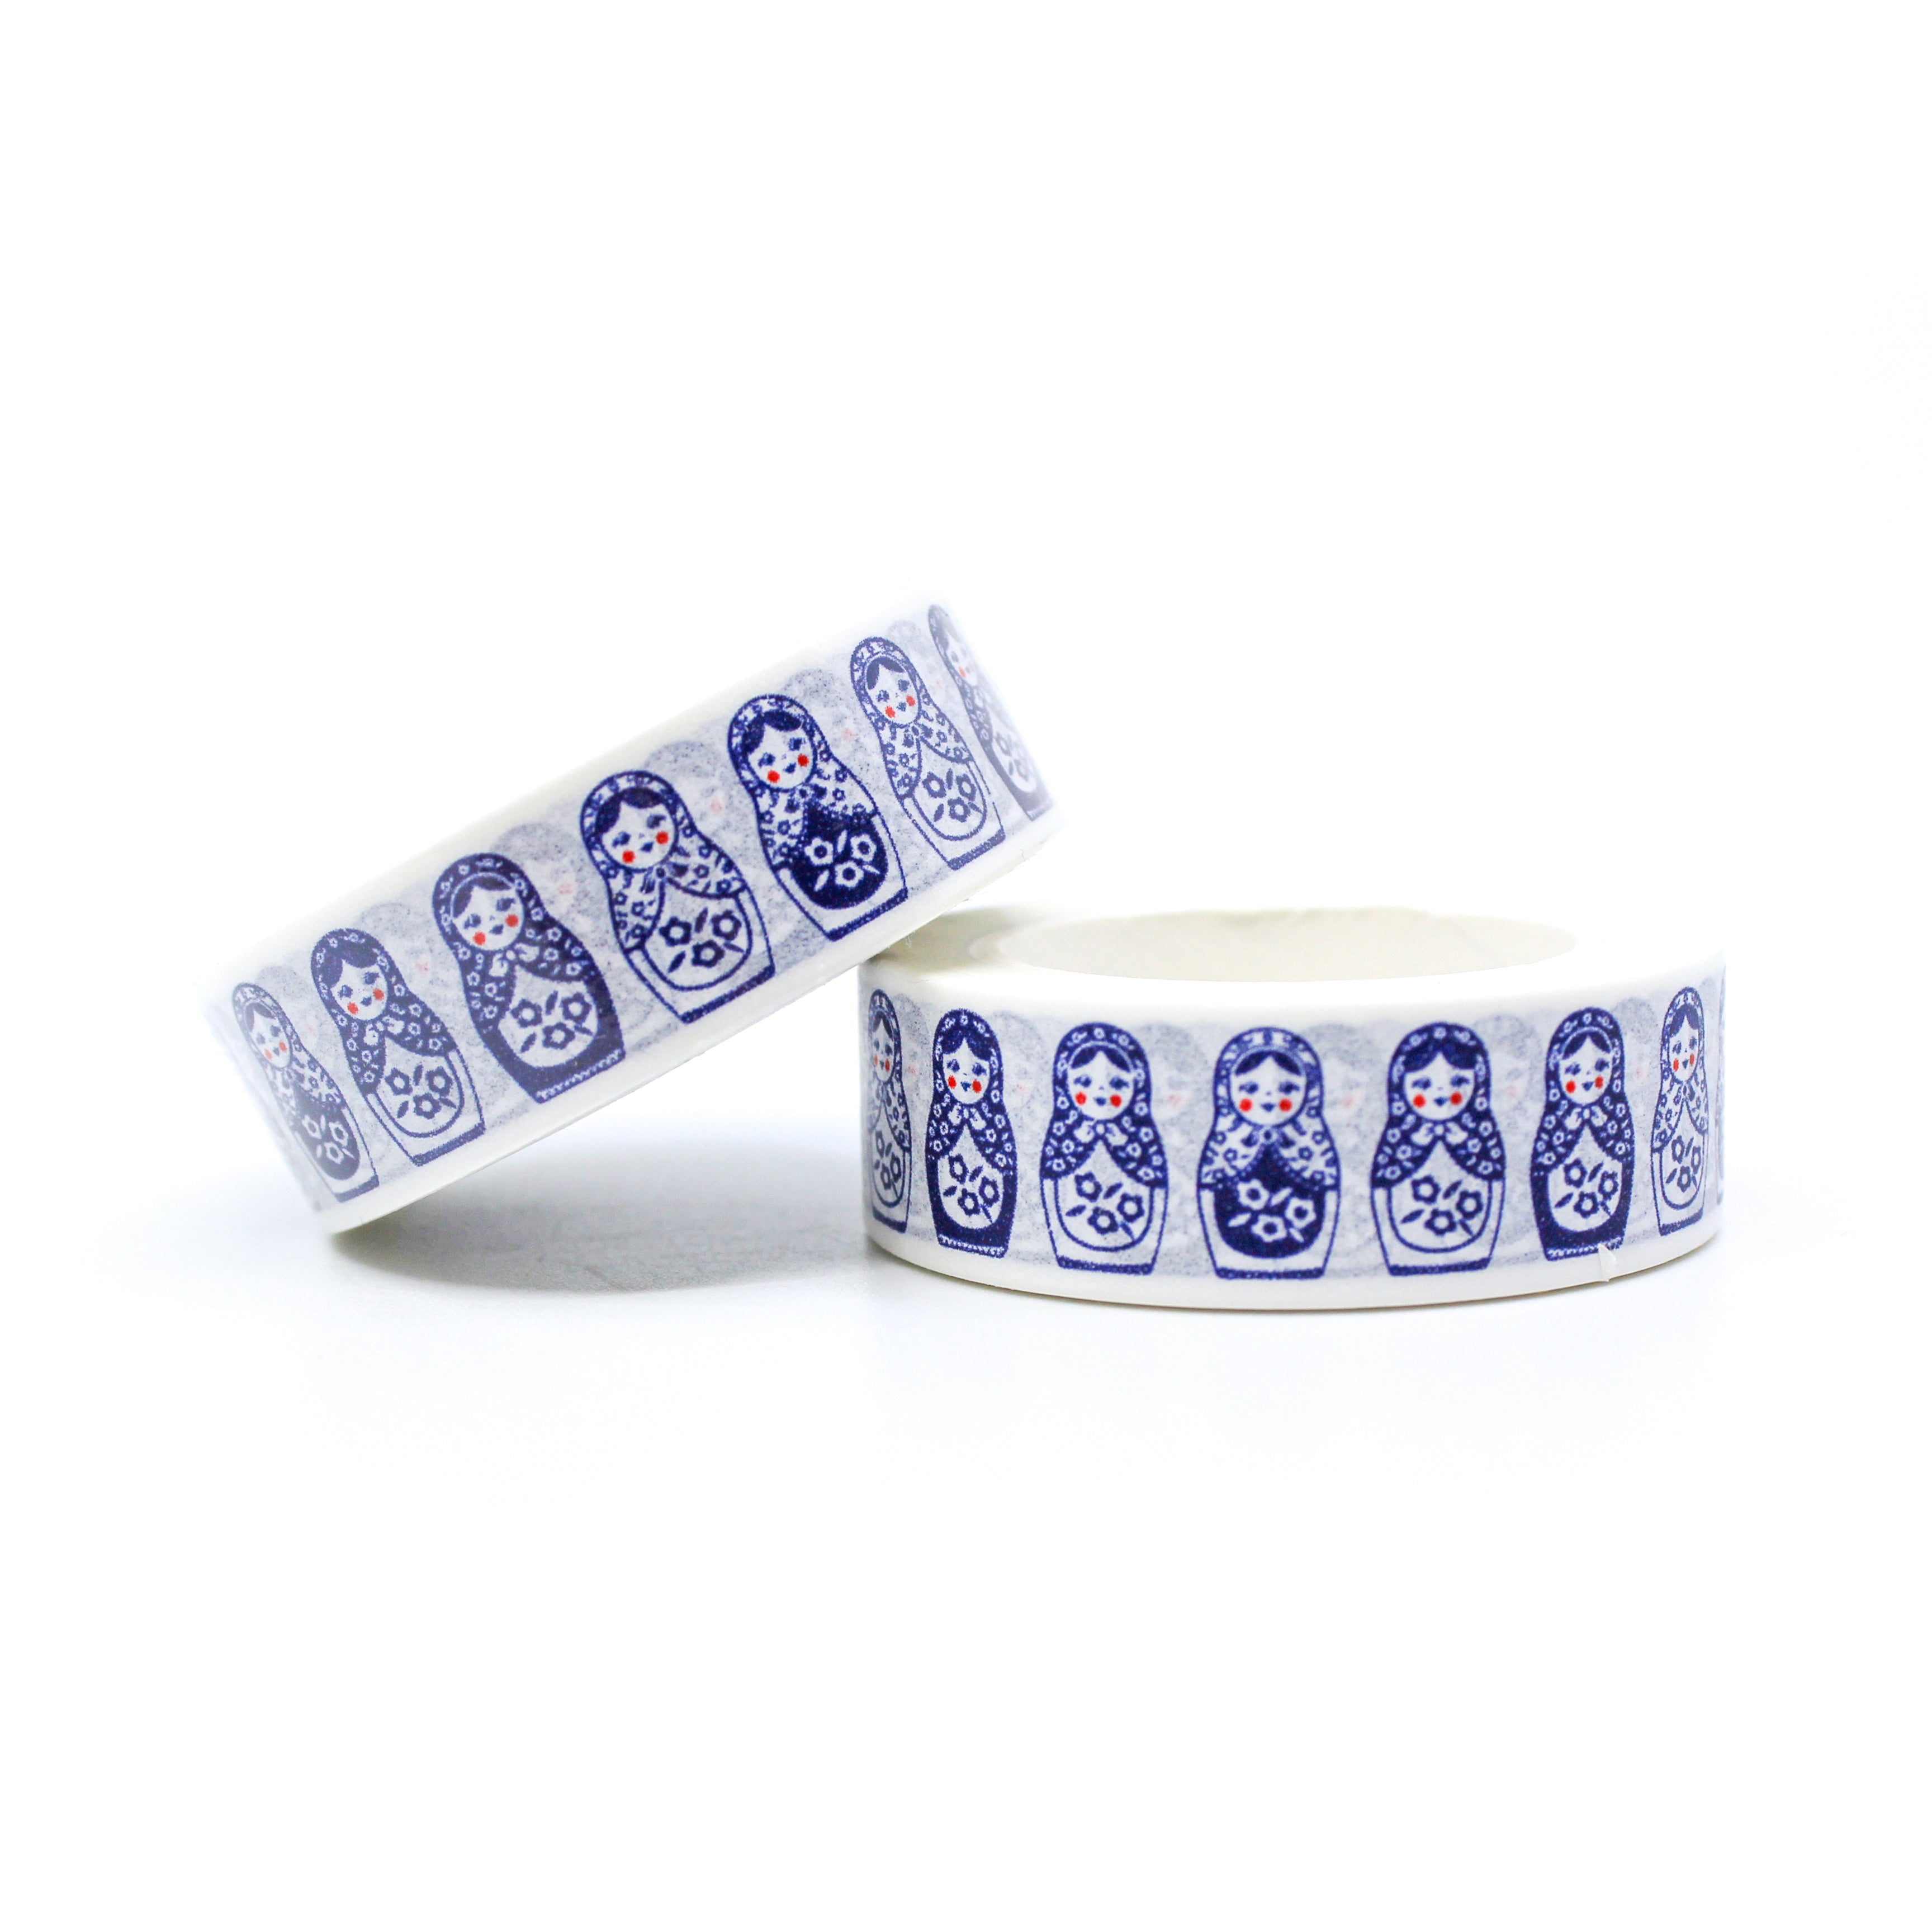 This is a cute blue Matryoshka dolls pattern washi tape for Journal Supplies, Scrapbooking washi tapes from BBB Supplies Craft Shop